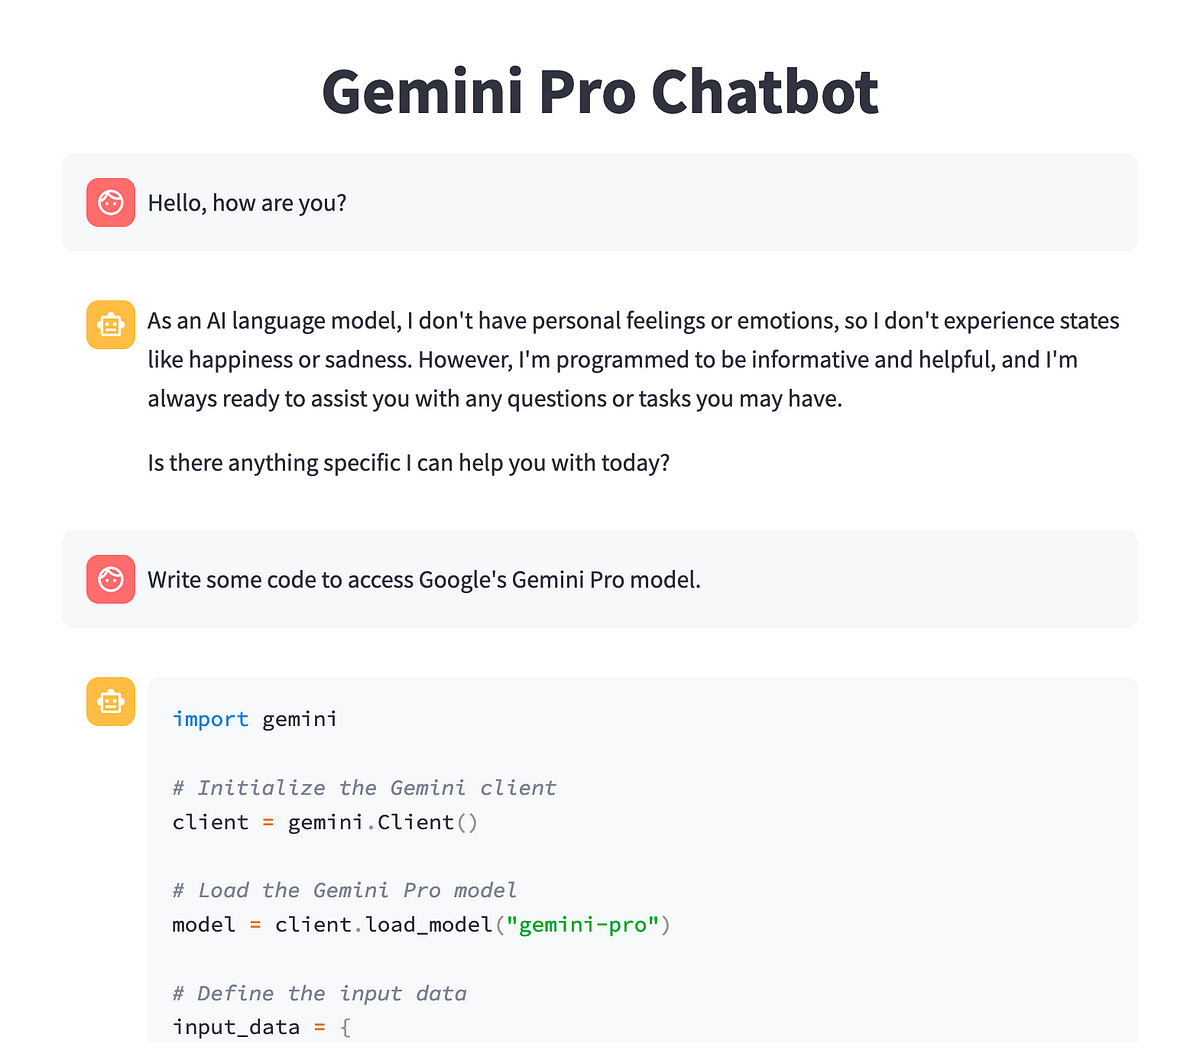 Building Your Own Gemini Pro Chatbot, by Heiko Hotz